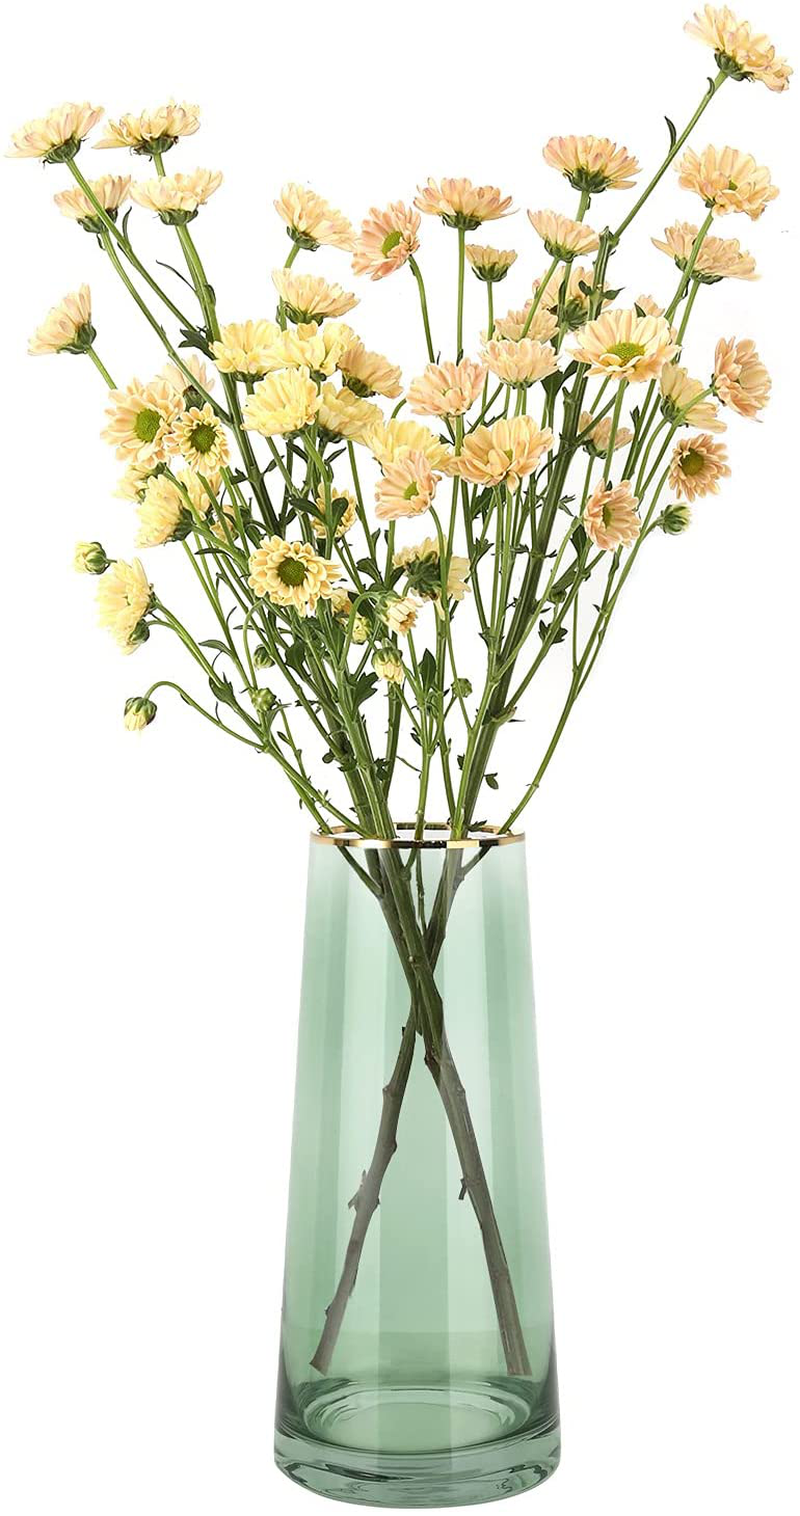 Luxspire Tall Glass Vase for Flowers,Large Clear Vase Morden Ins Style,Crystal Vases Flowers Hand Blown Glass for Home Decoration Living Room Office Bethroom Decor,8.7 Inch,Smoky Gray Home & Garden > Decor > Vases Luxspire Green Exquisite 